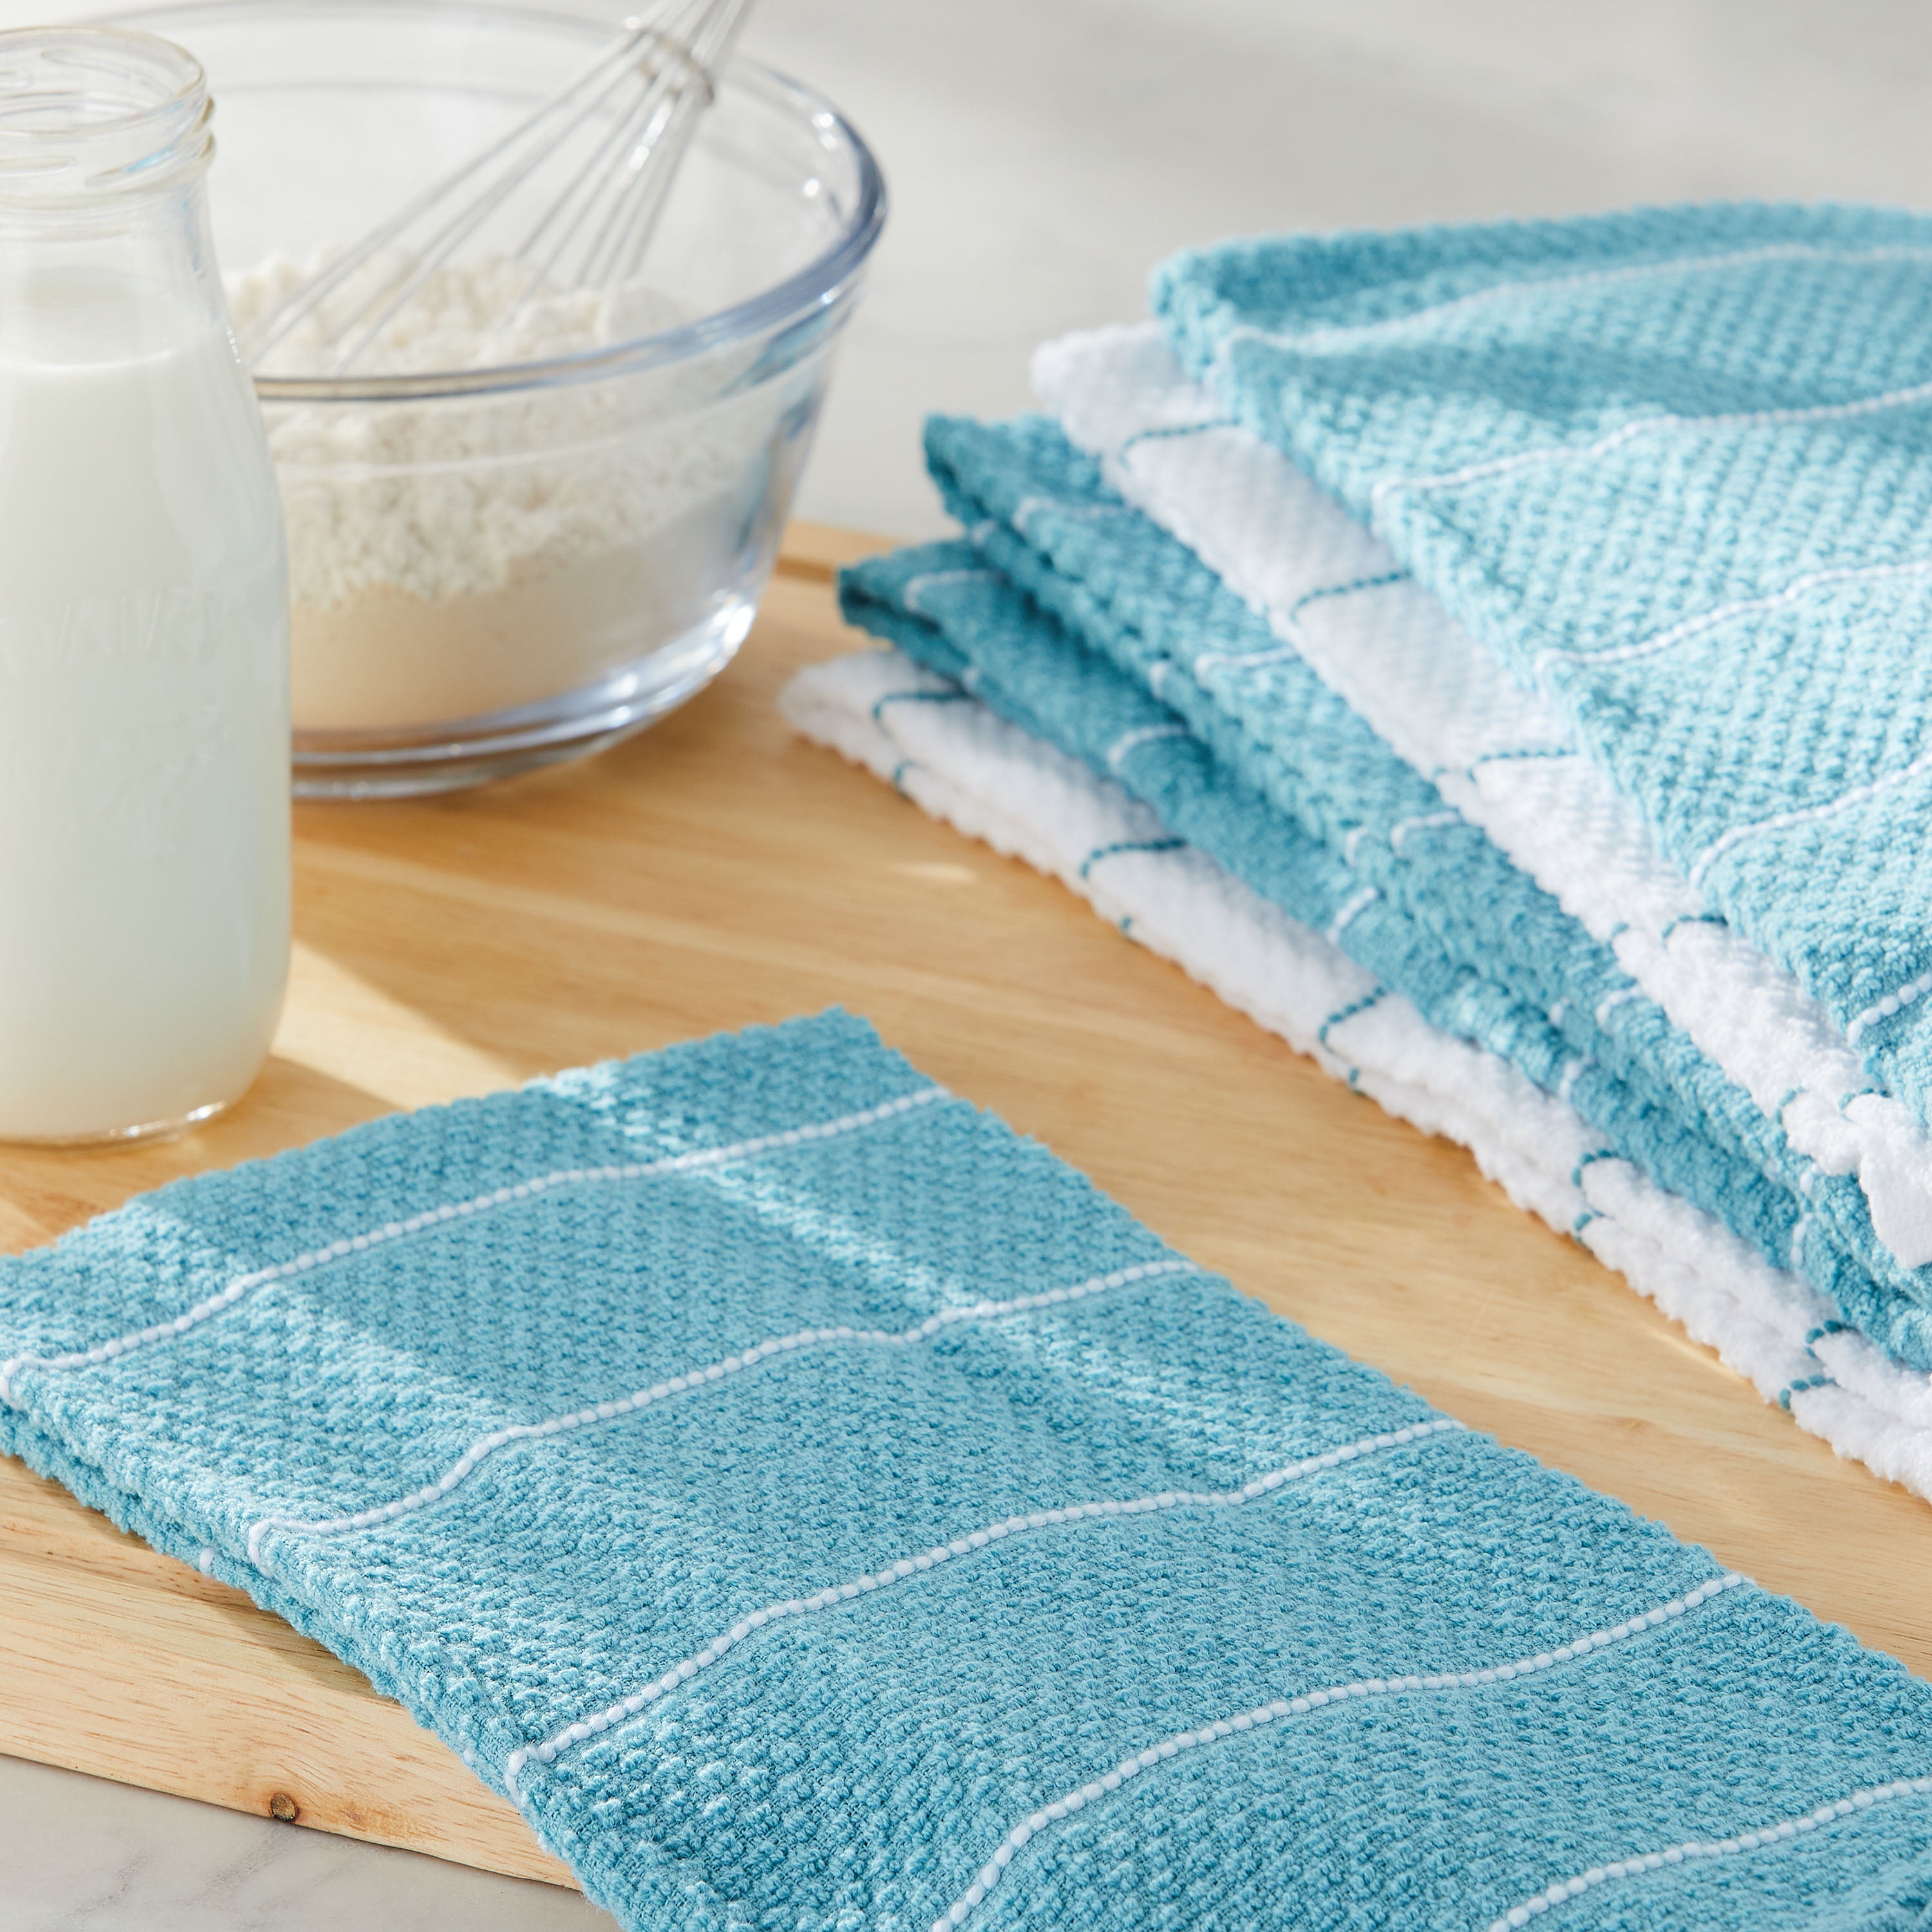 Talvania Kitchen Towels 100% Cotton Dobby Weave Terry Towel Set Soft and Absorbent Multipurpose Dish Cloth, Hand Towel and All Kitchen Cleaning 15” x